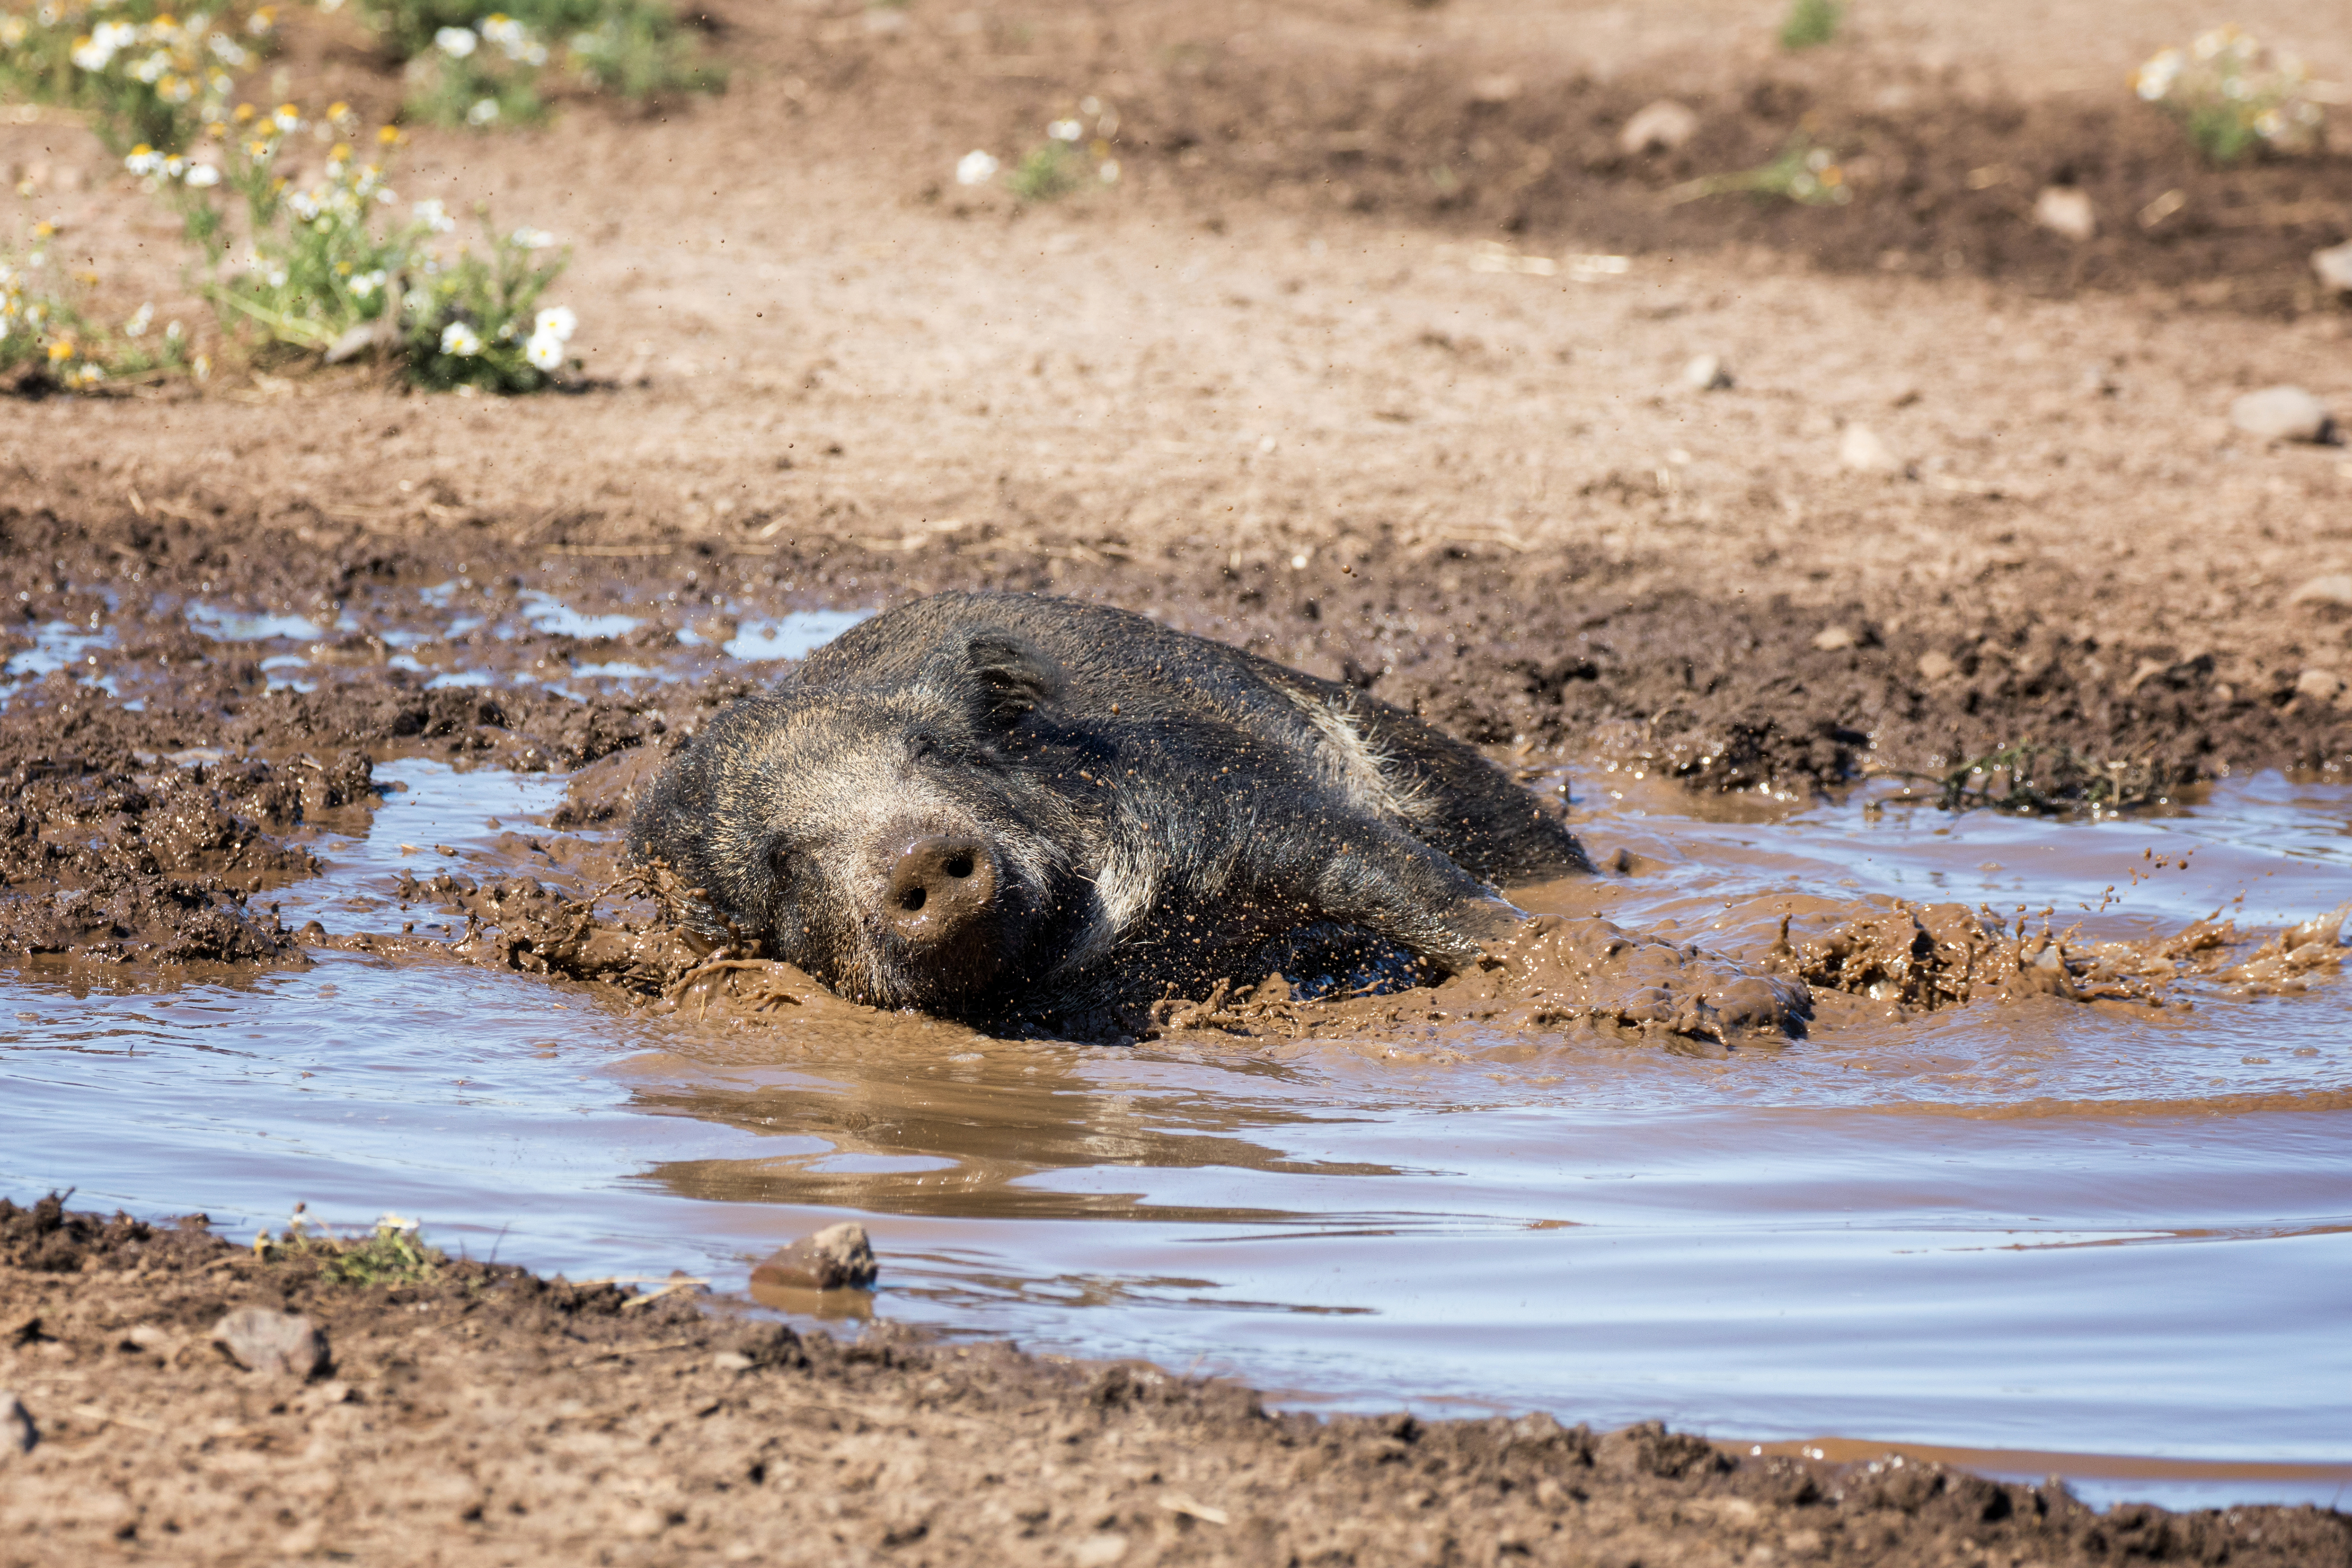 pig wallowing in mud on a hot day